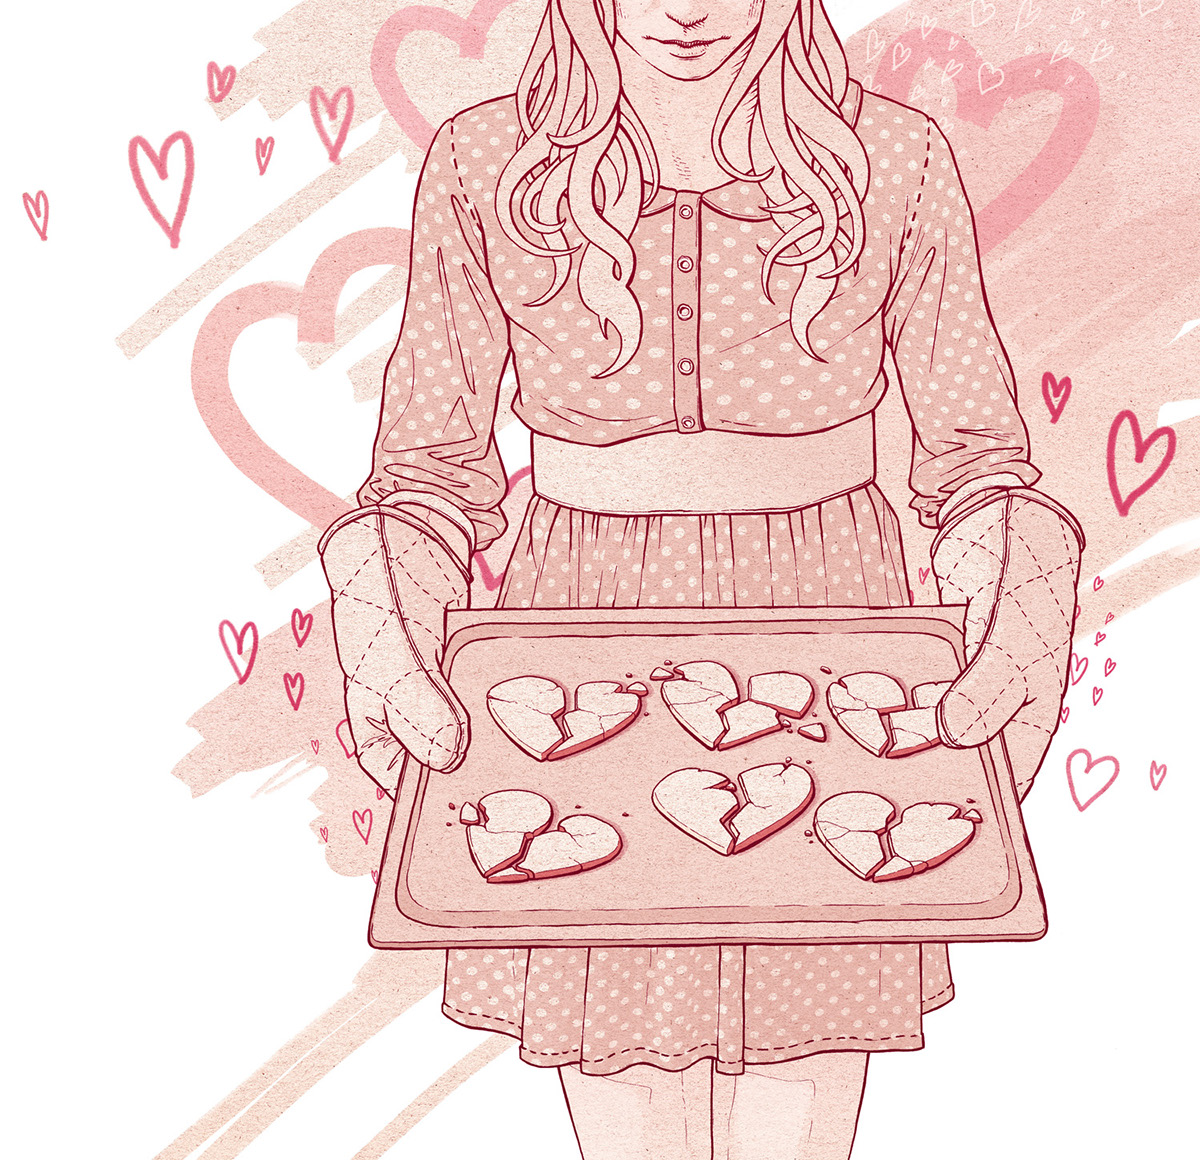 Love  heart  cookies  Valentine's Day cooking relationship girl woman polka dots